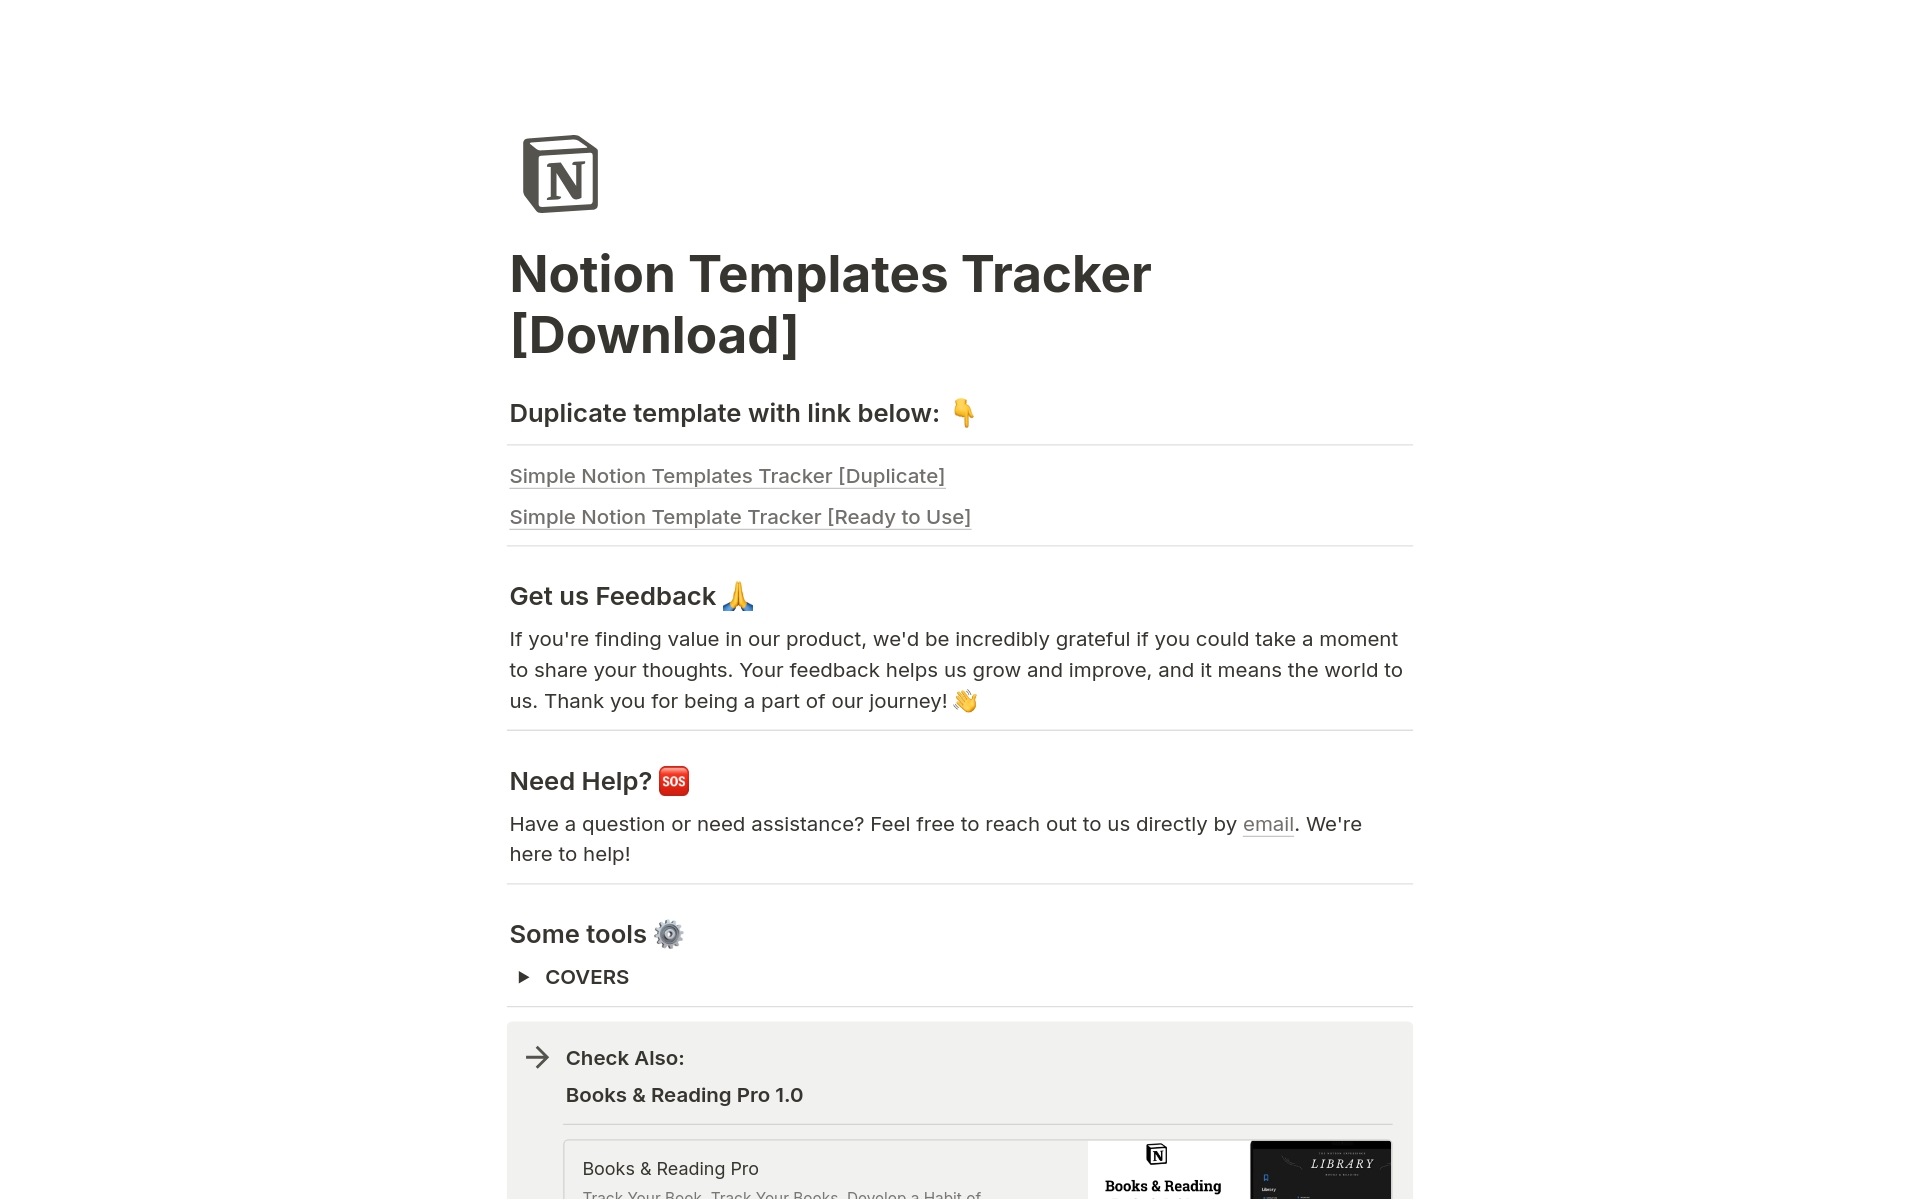 Notion Creators who want to organize and track their Notion templates in a very effective way